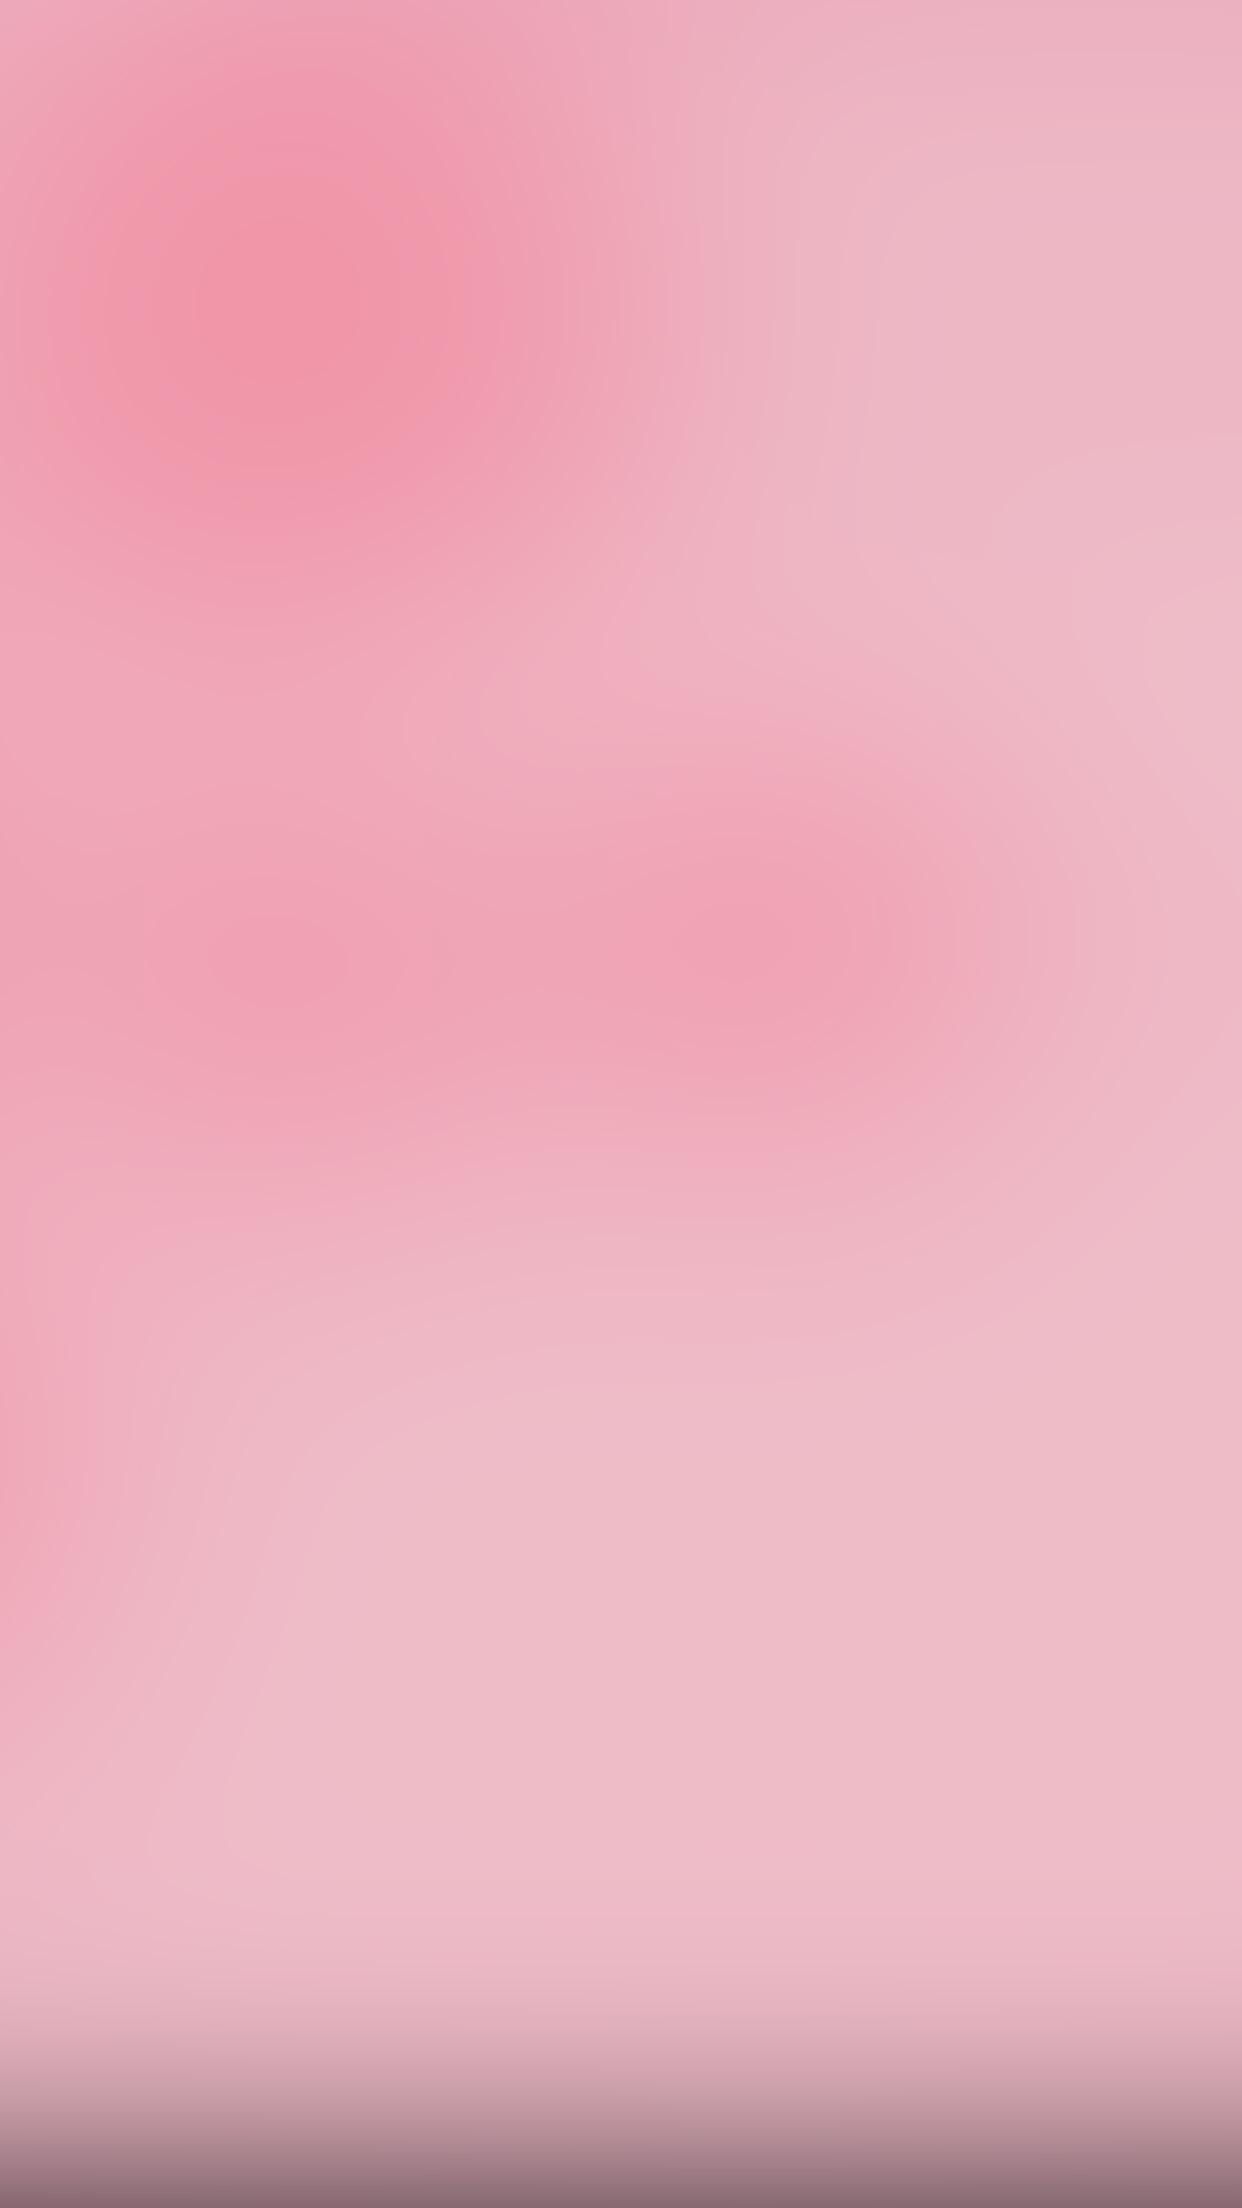 All Pink Music Spring Gradation Blur Android wallpaper